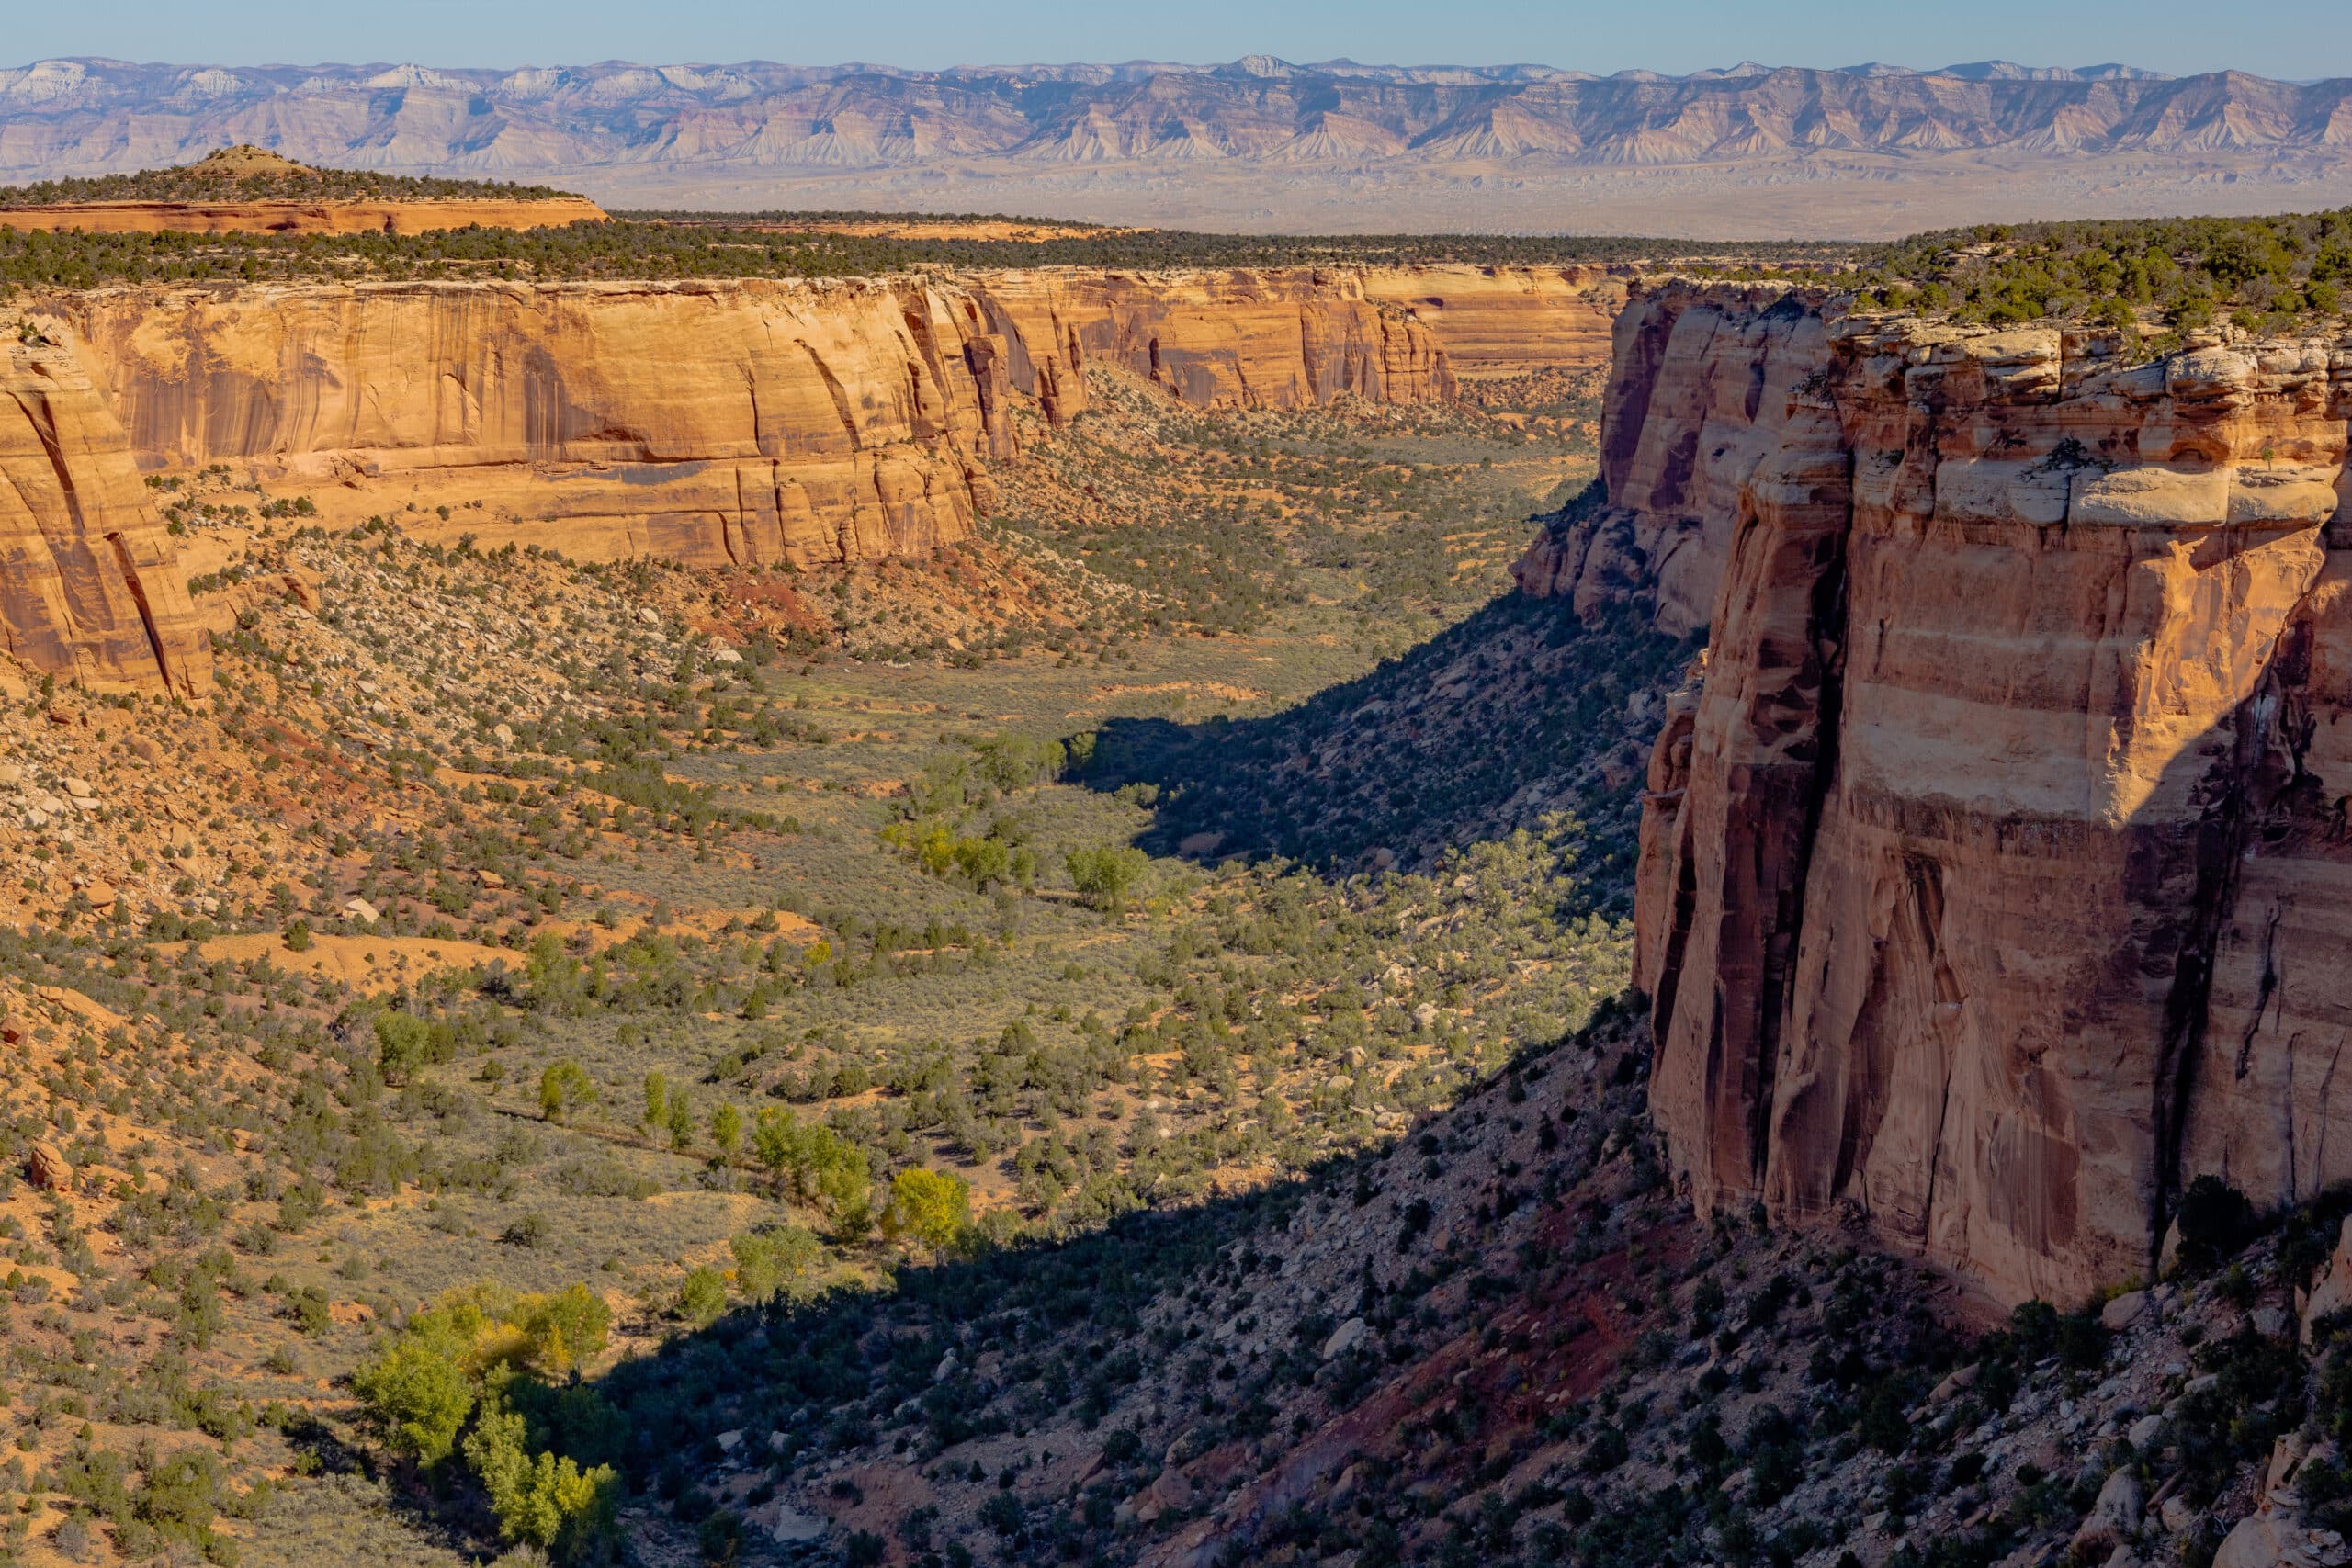 A view of the canyon from the top of a cliff.